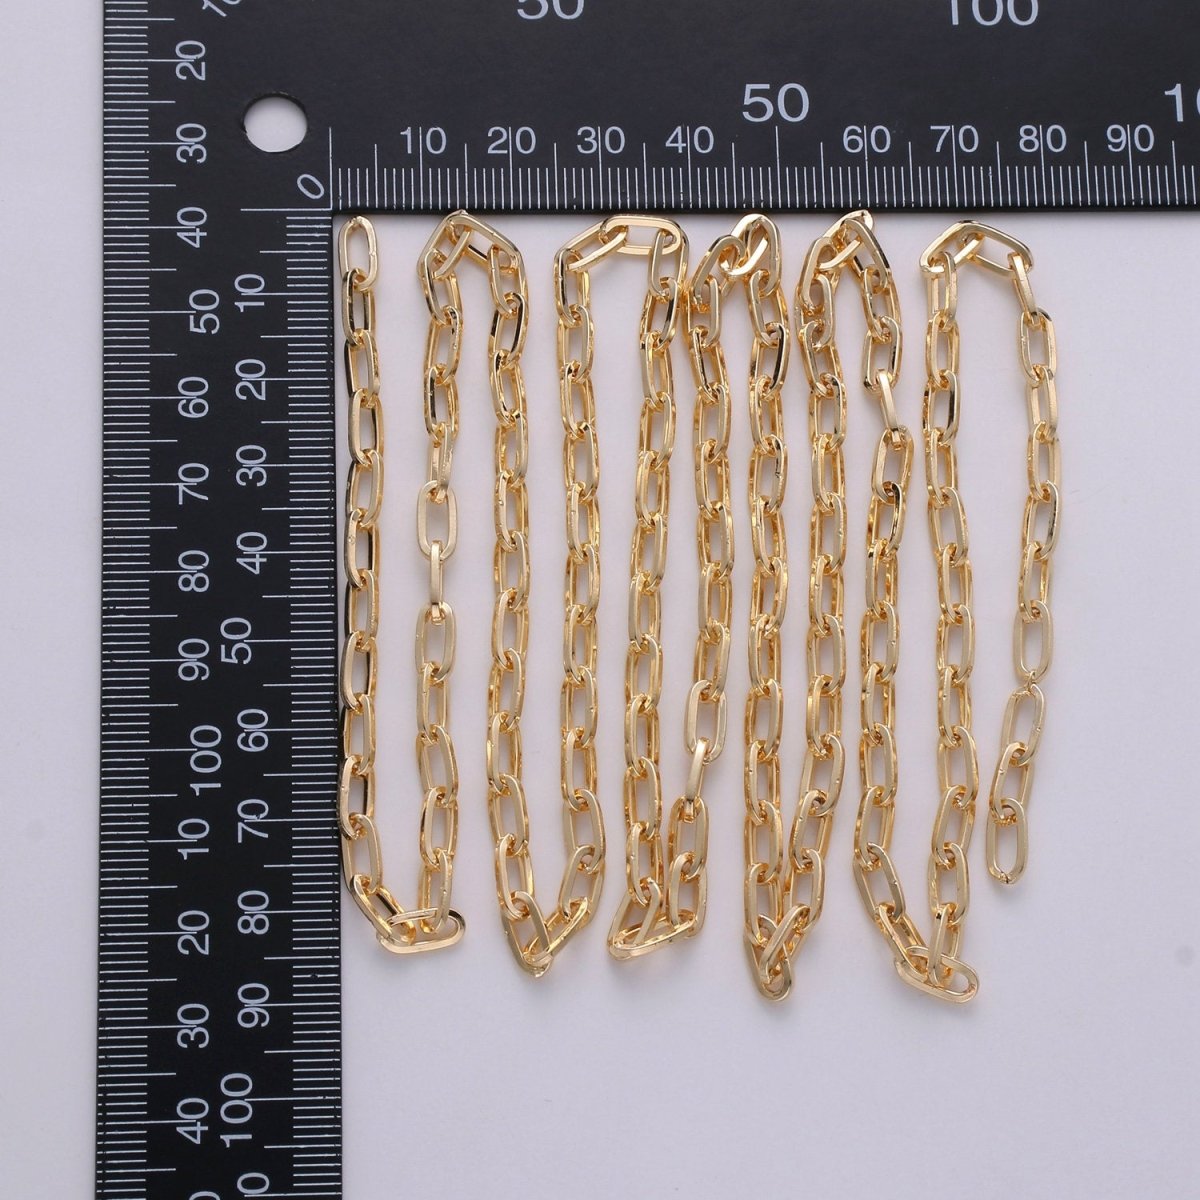 Oval Paperclip Chain Necklace 18k Gold Plated Long Oval Paper Clip Chain 1 yard, 3 feet Lead, Nickel Free Unfinished Link Chain | ROLL-251 Clearance Pricing - DLUXCA